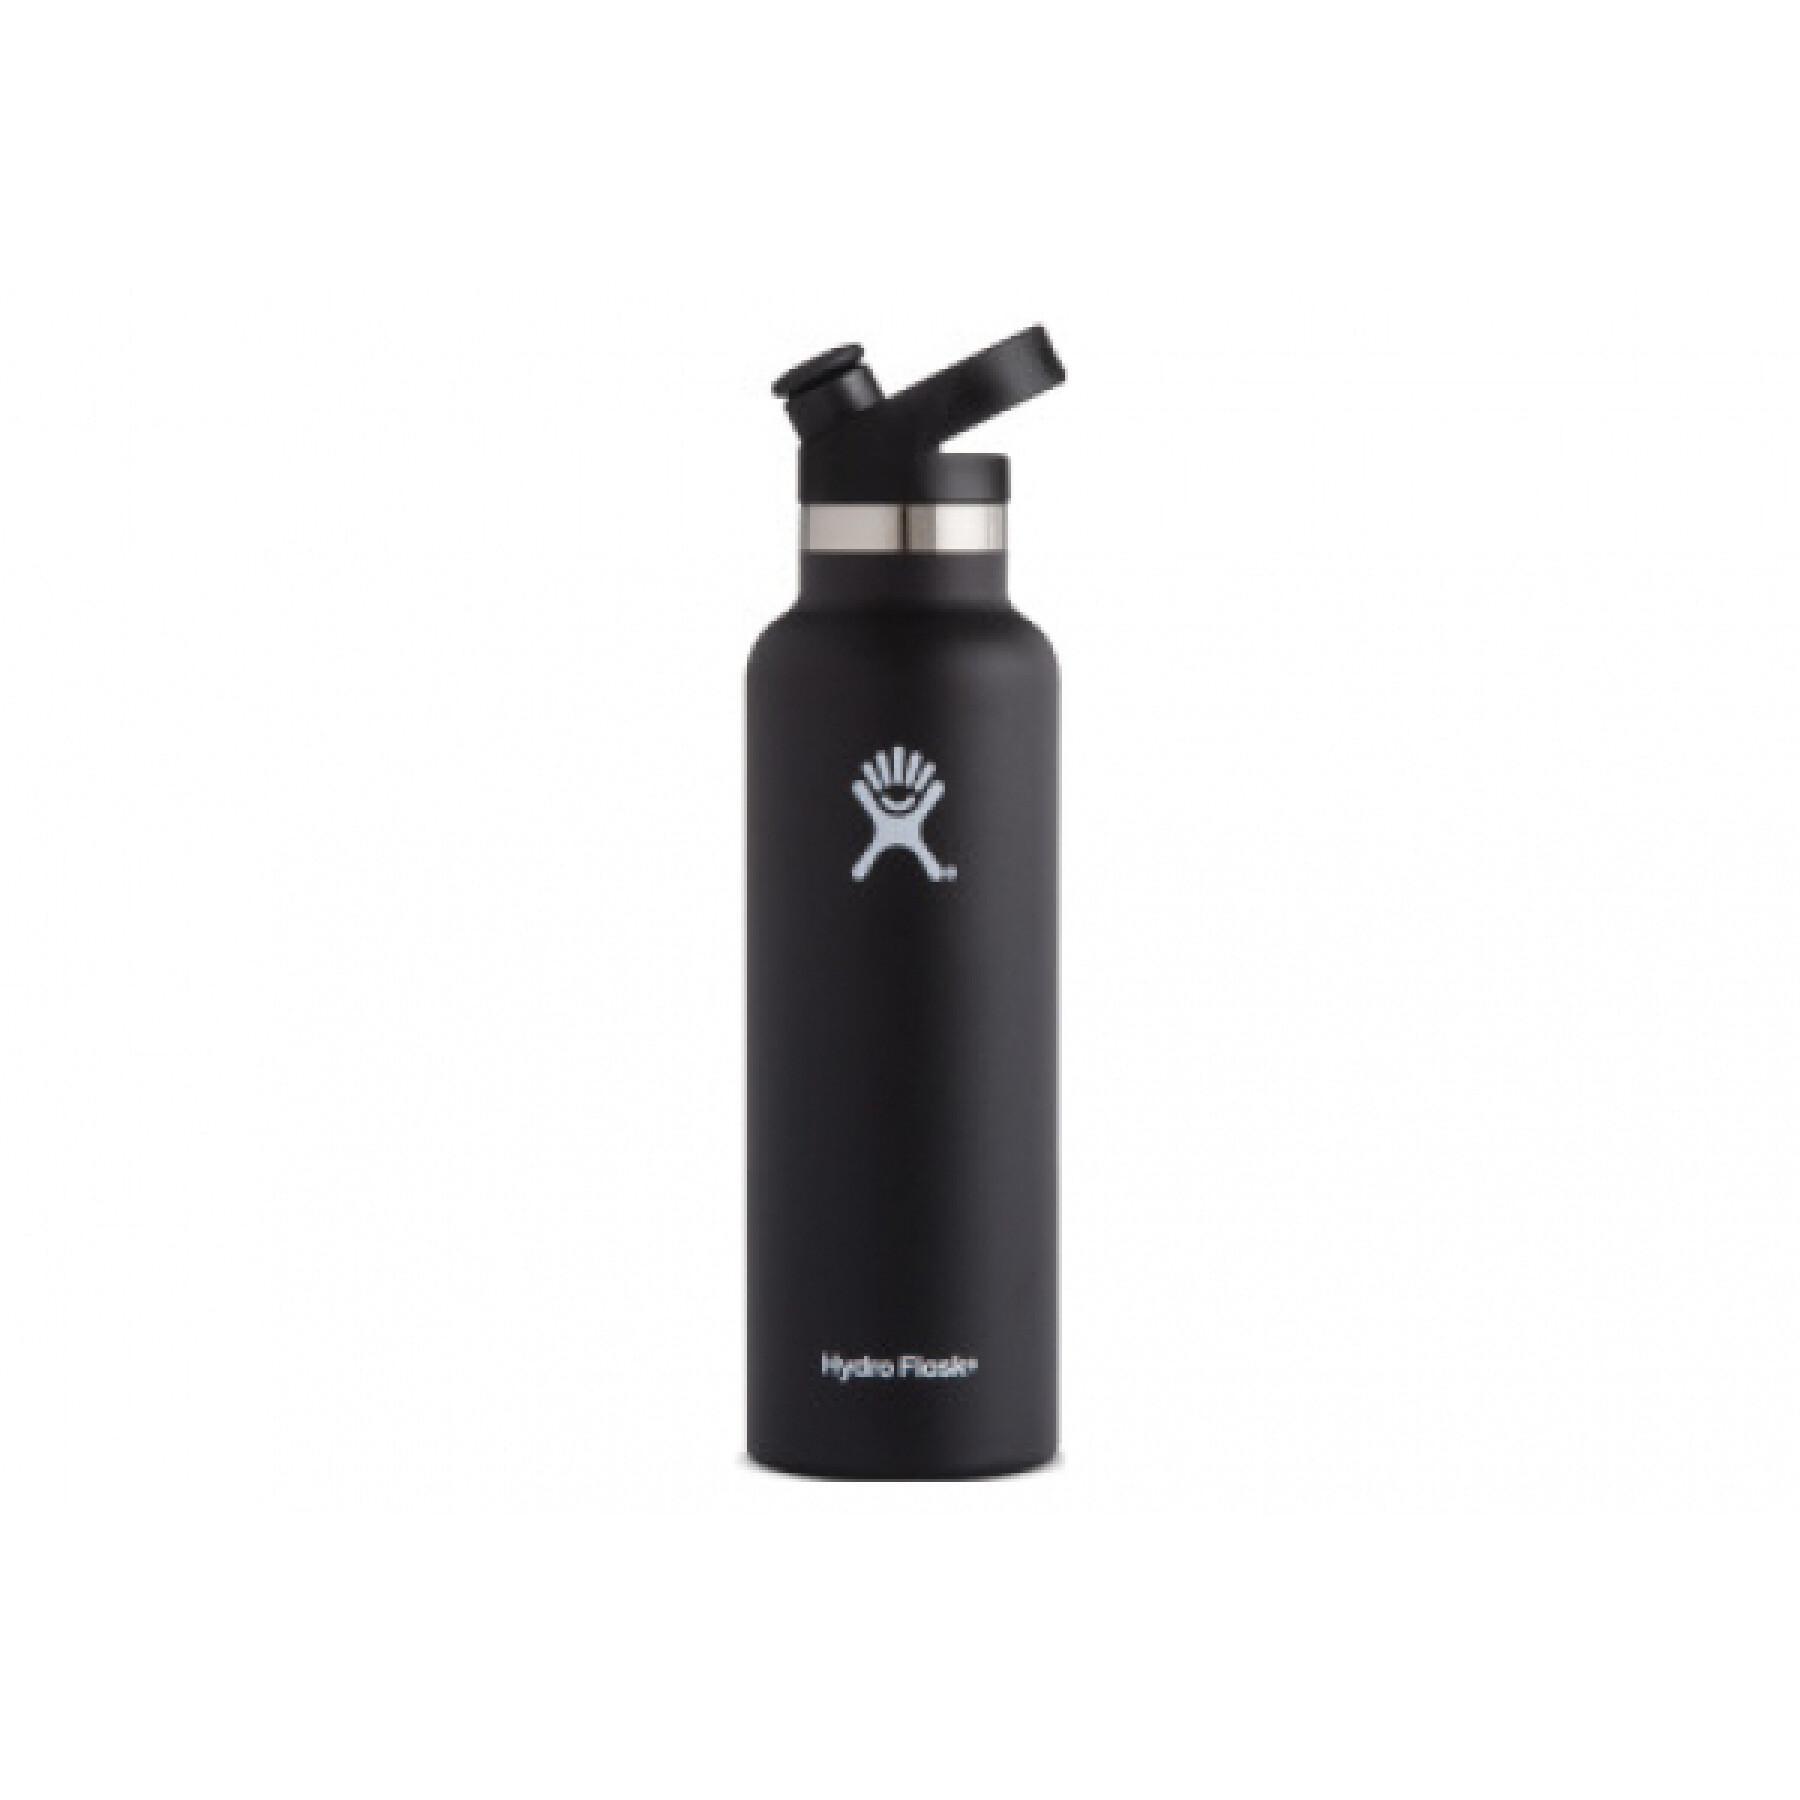 Standardflasche Hydro Flask mouth with sport cap 21 oz